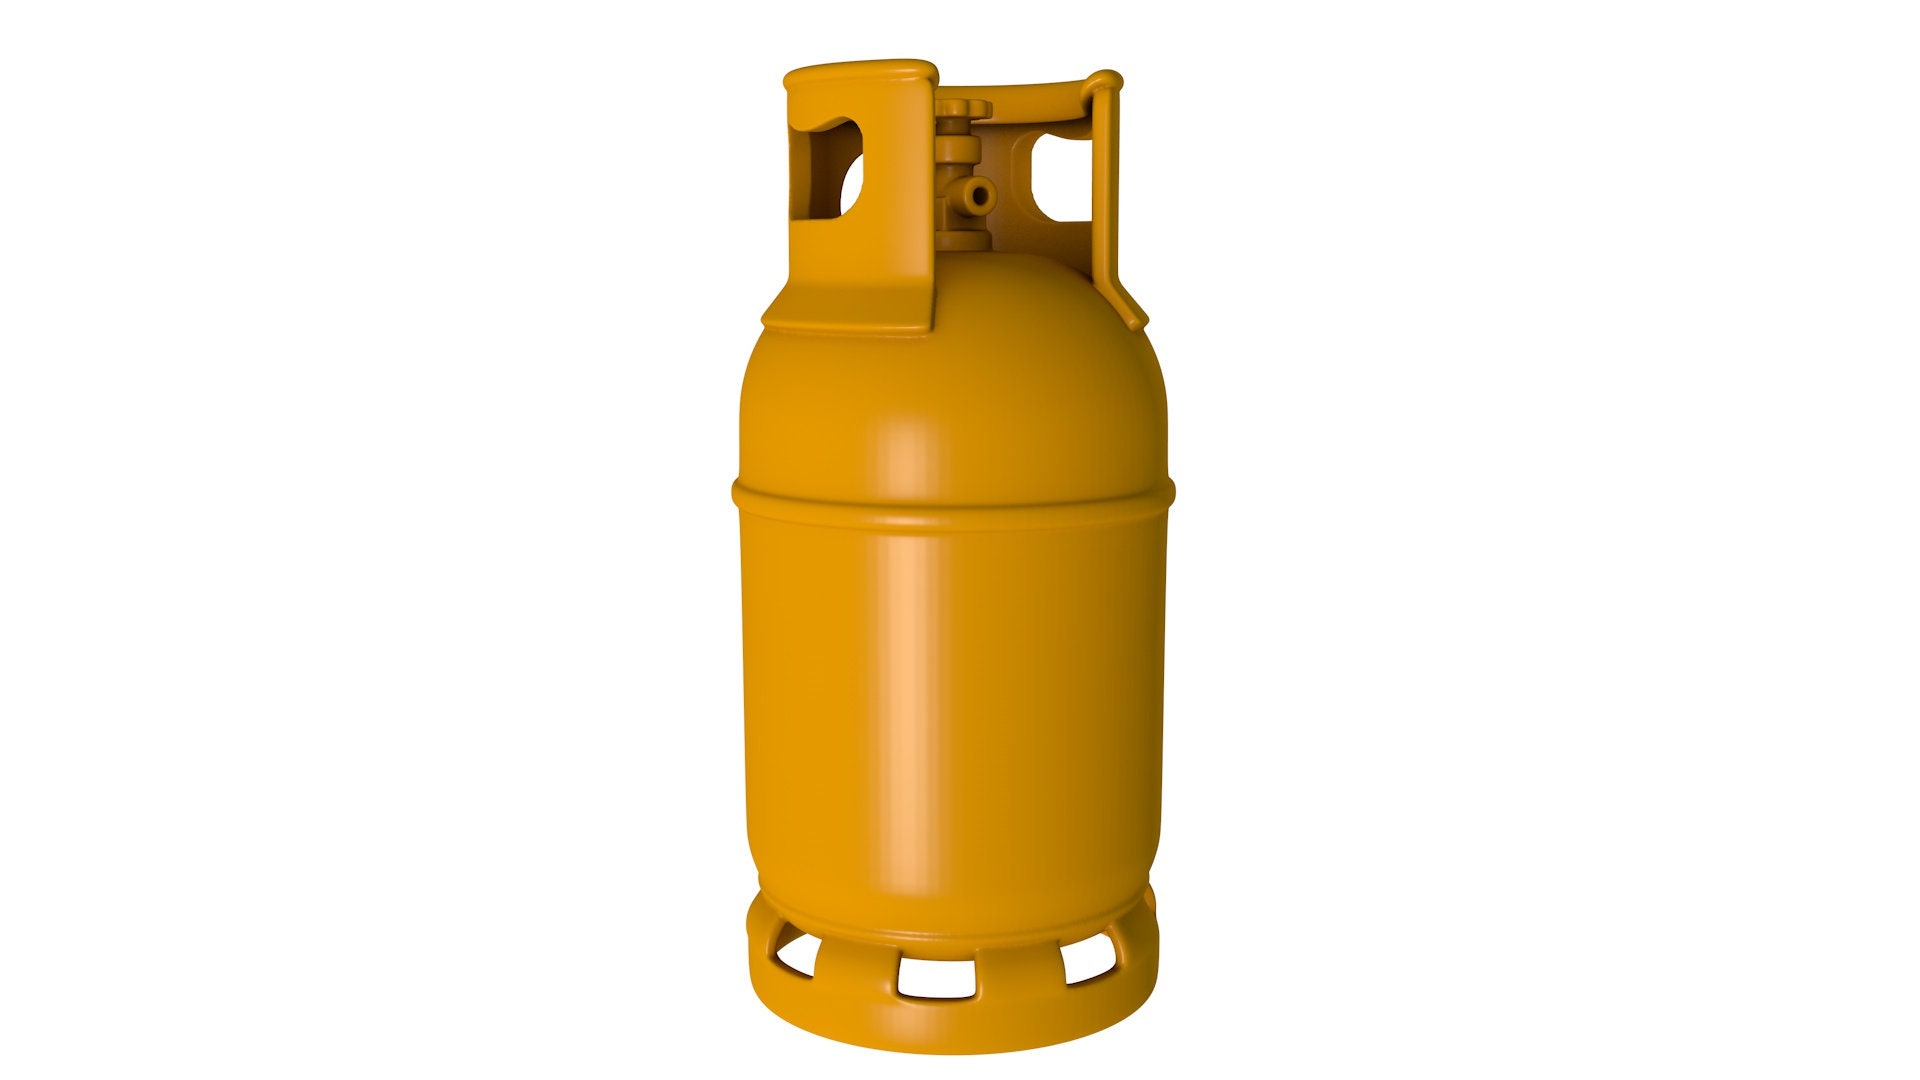 1 METER REFILL Campingaz CAMPING BOTTLE 901,904,907 FROM propane GAS  CYLINDER